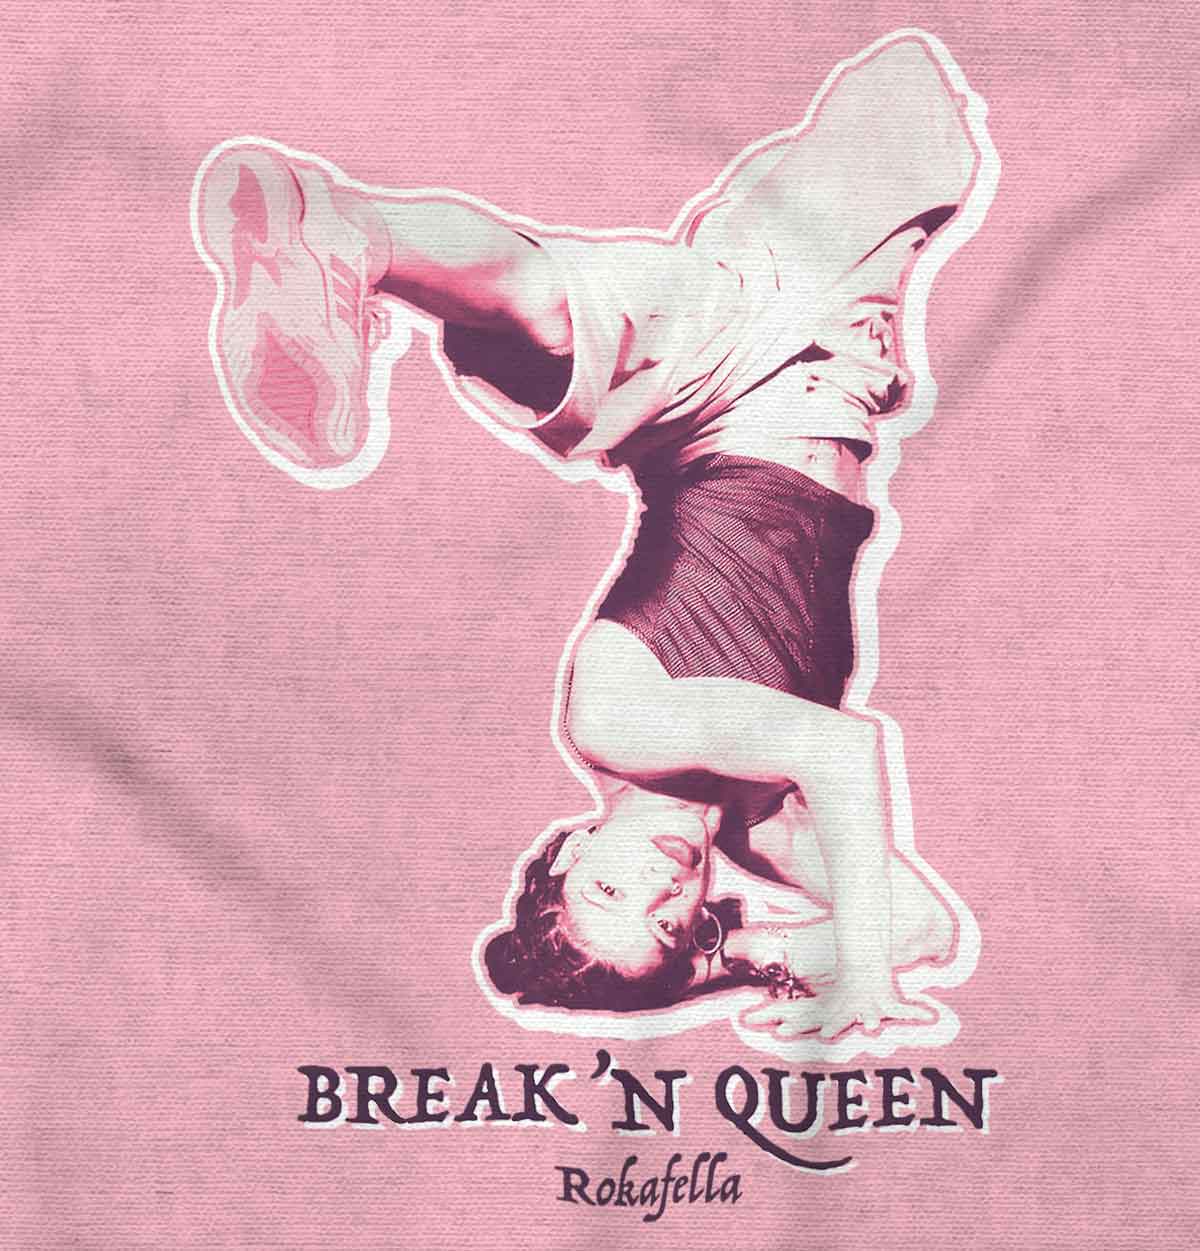 This image captures Ana Rokafella Garcia, a famous breakdancer, in a powerful pose on the dance floor, representing the energy and creativity of street dancing and honoring dance legends like Ana.